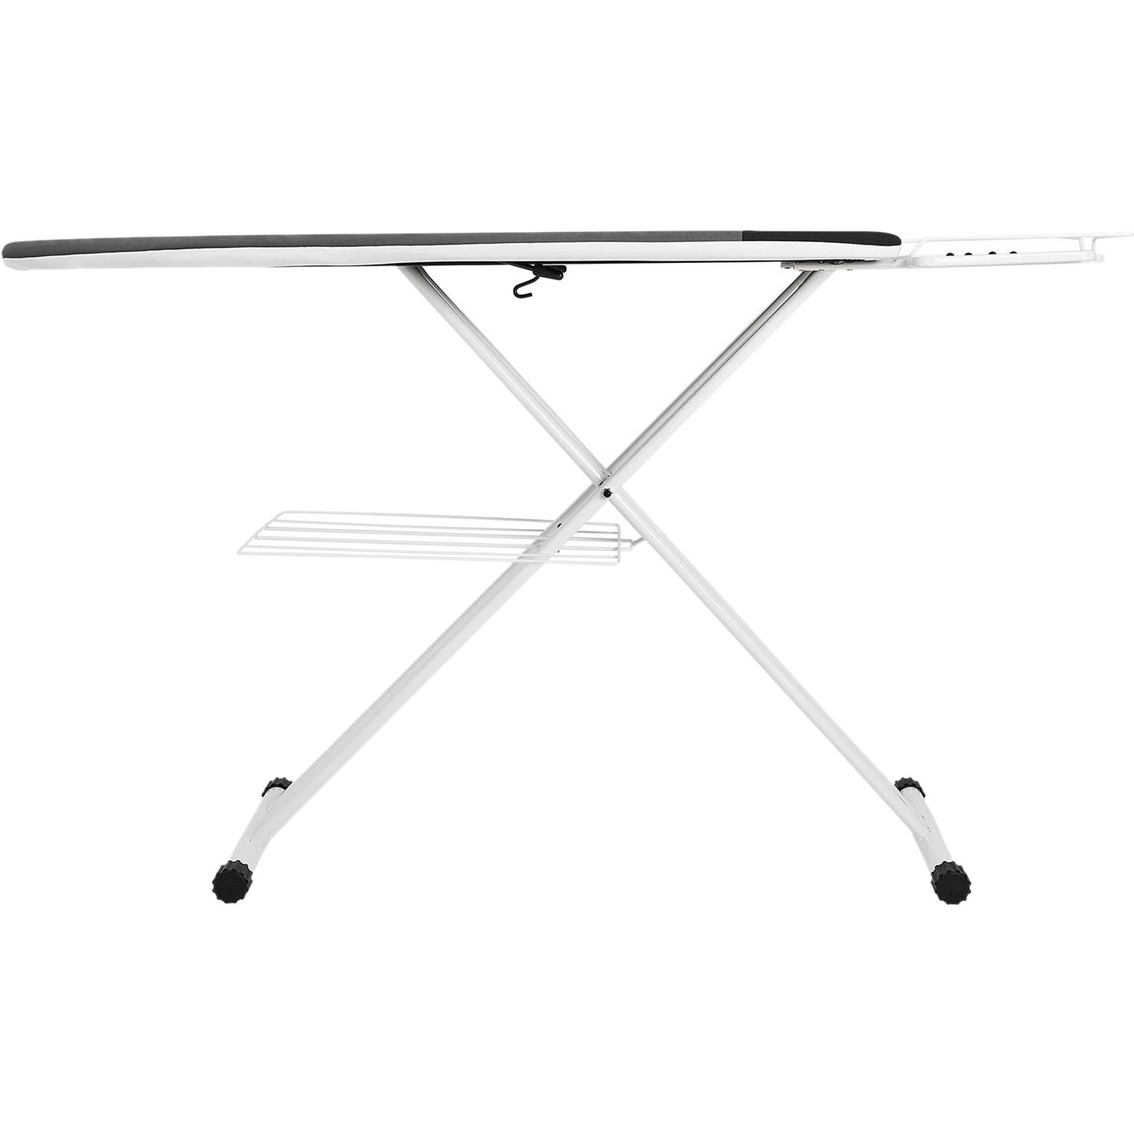 Reliable The Board 320 lb. 2 in 1 Ironing Board with Verafoam Cover Set - Image 4 of 6